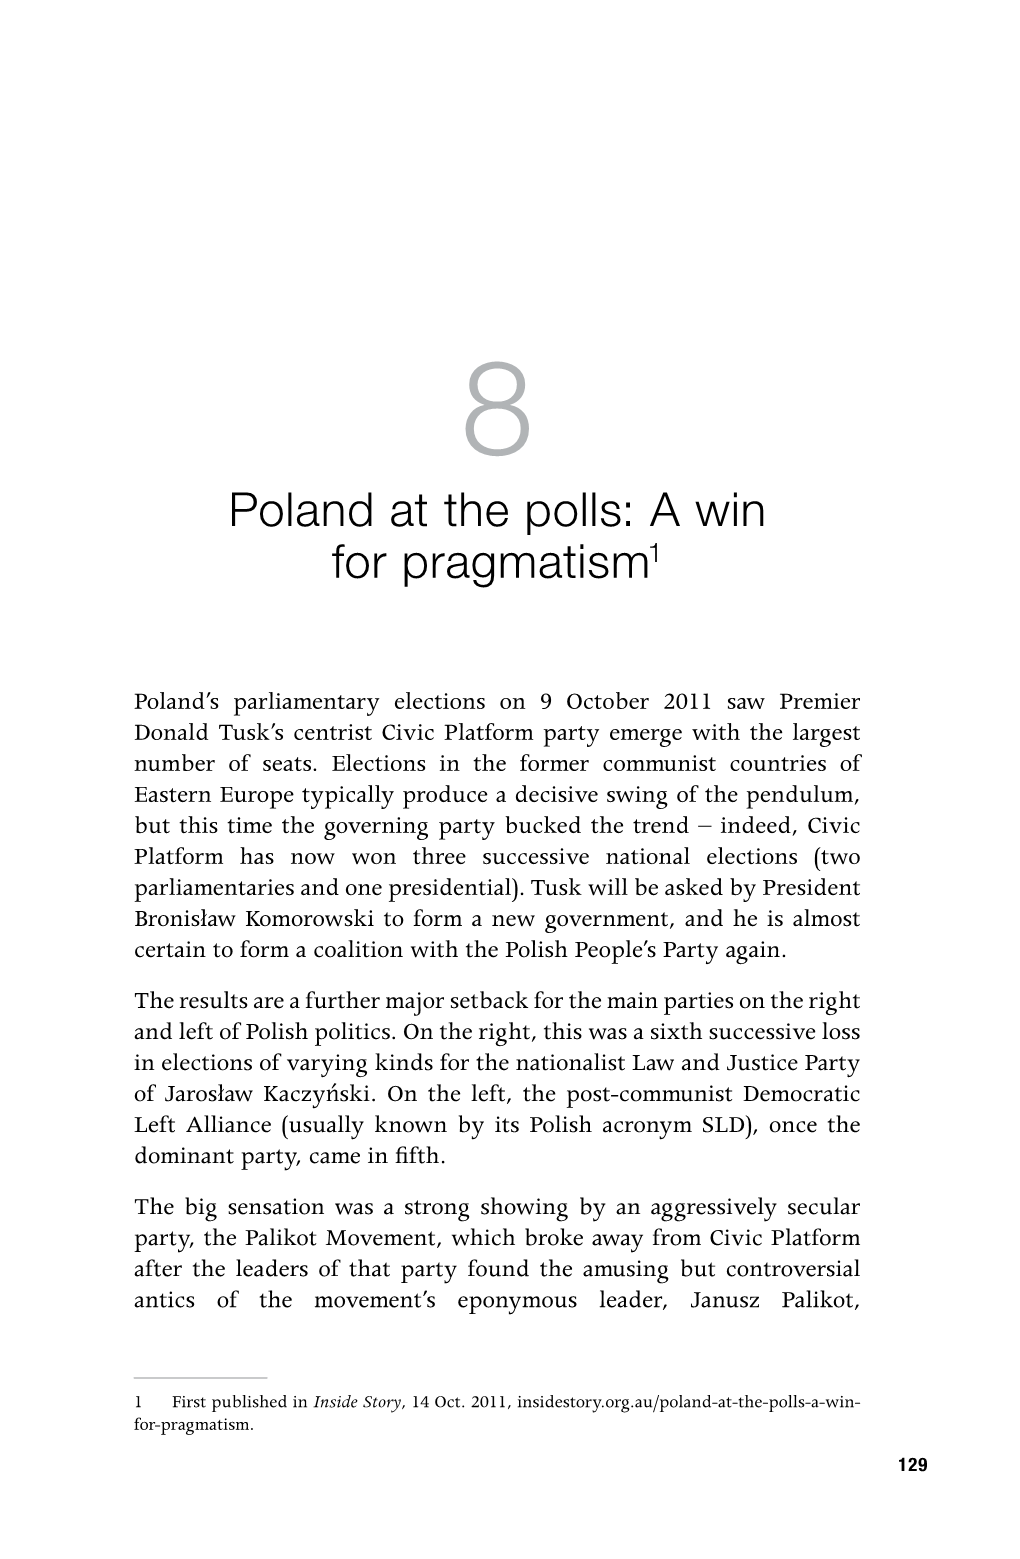 Poland at the Polls: a Win for Pragmatism1